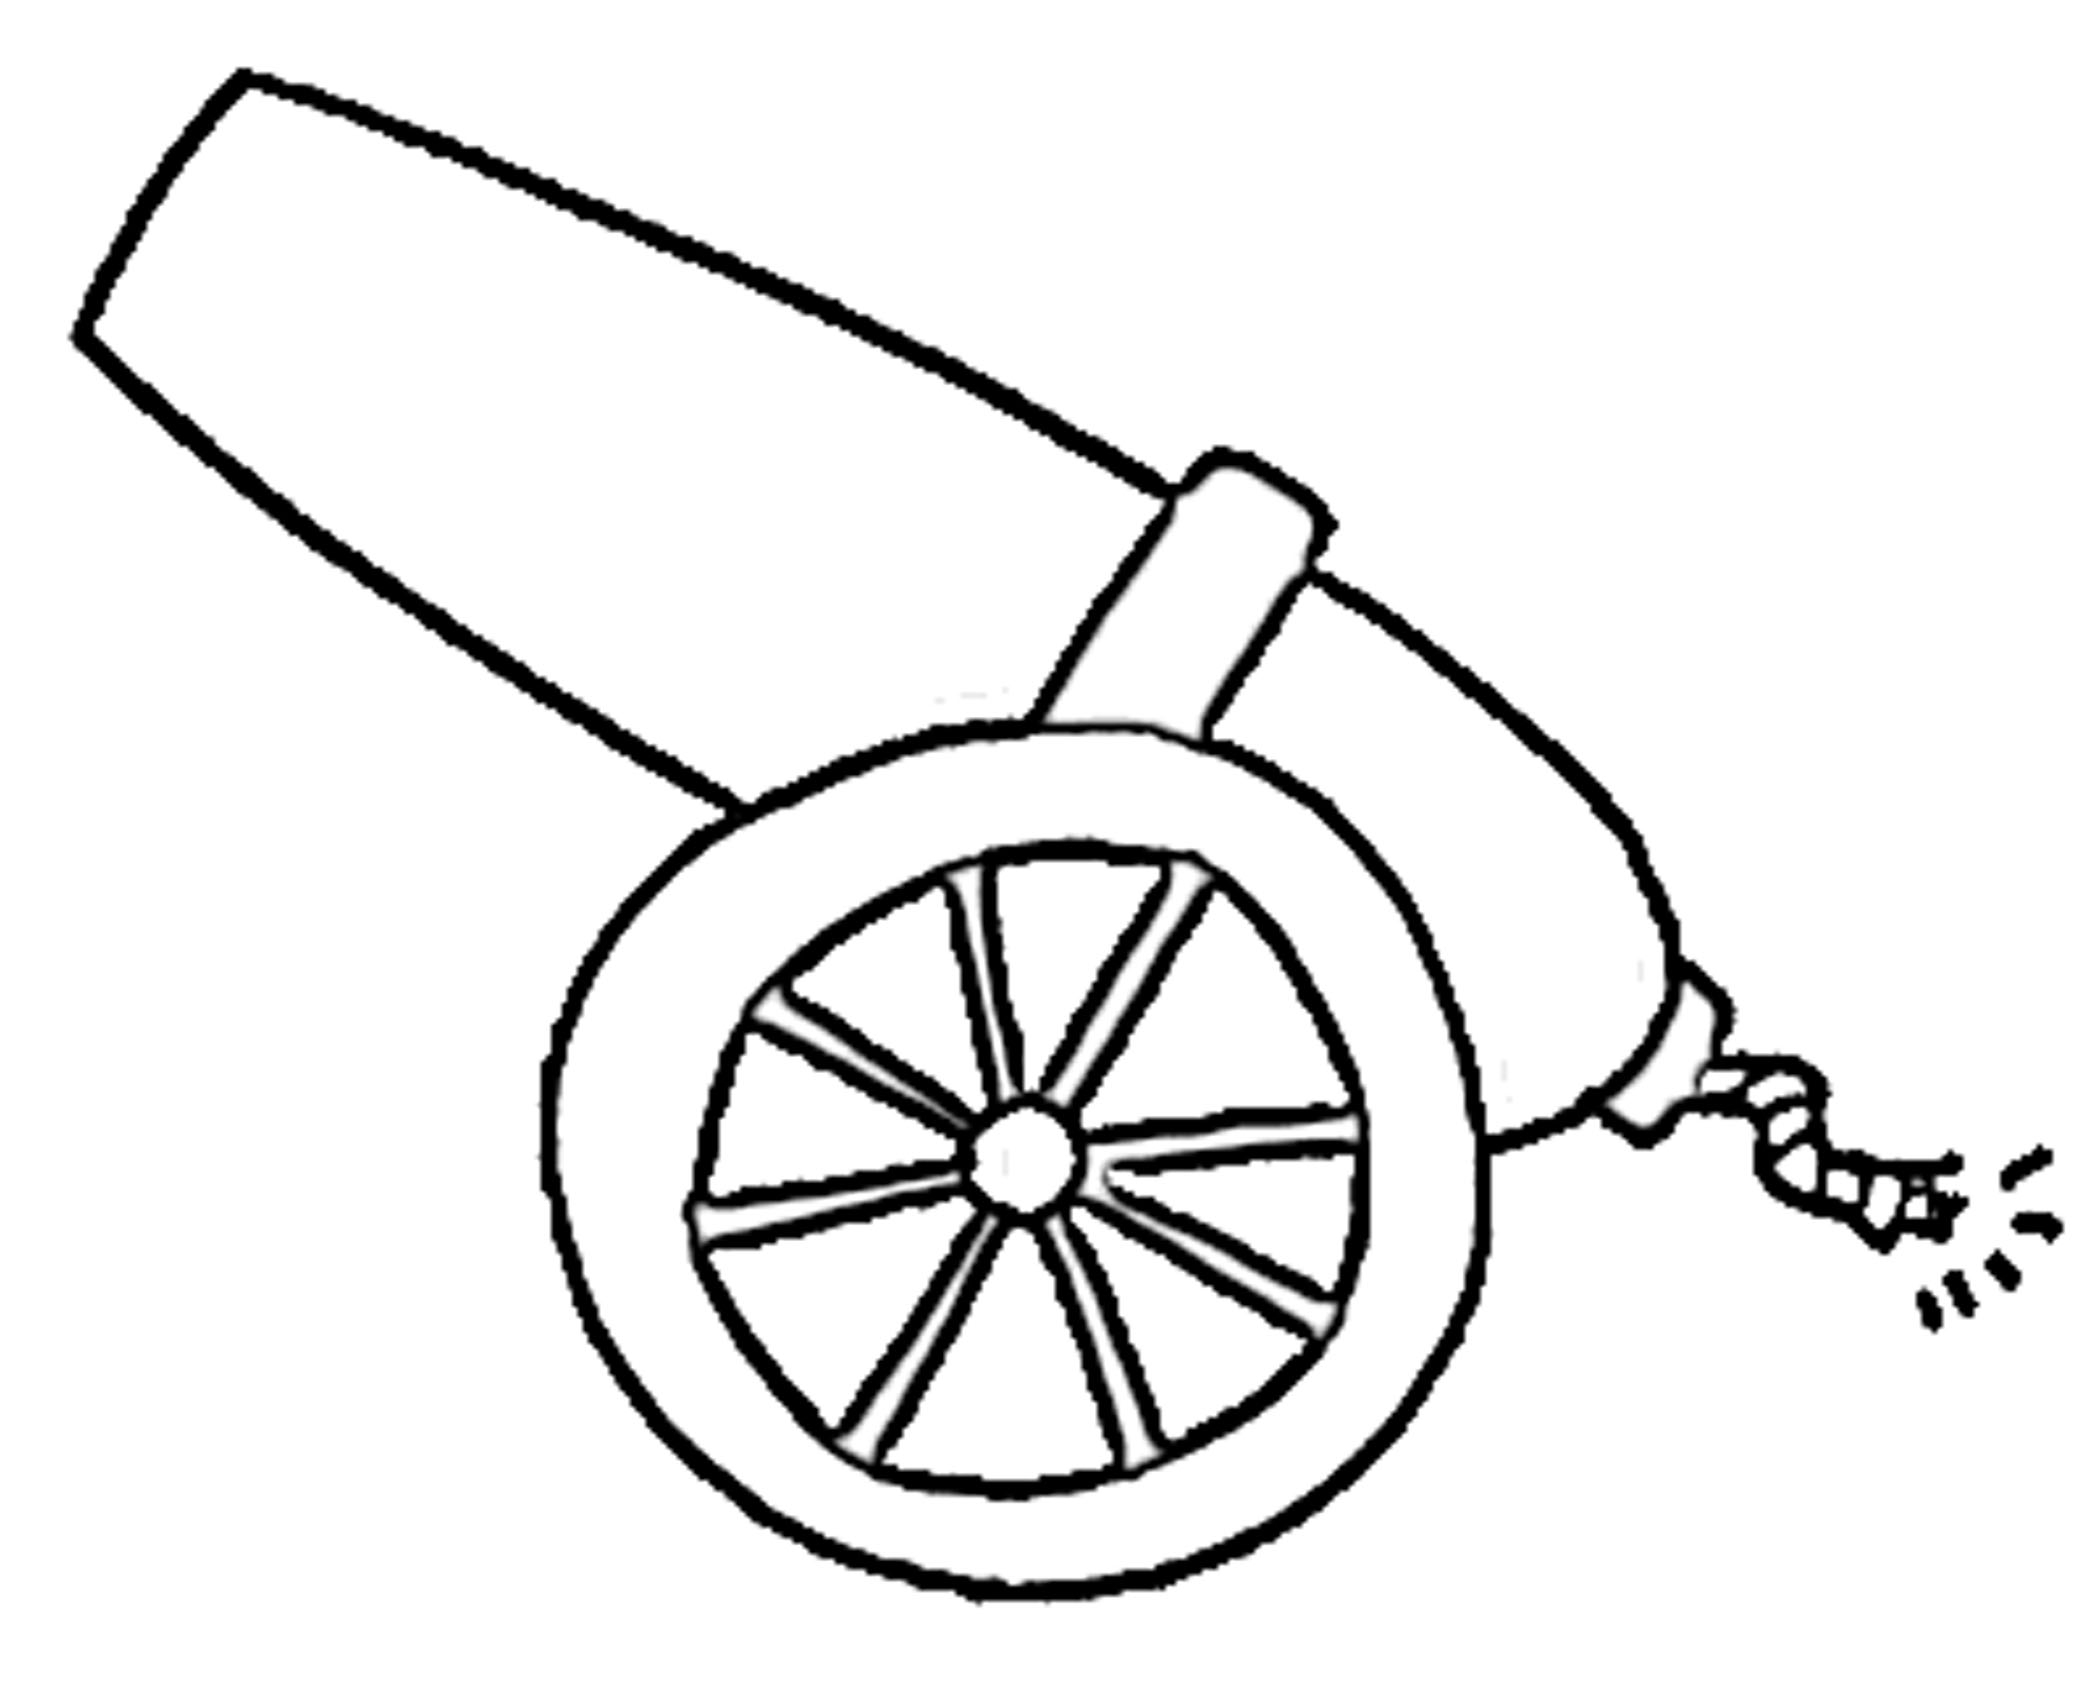 Cannon clipart simple, Cannon simple Transparent FREE for download on ...